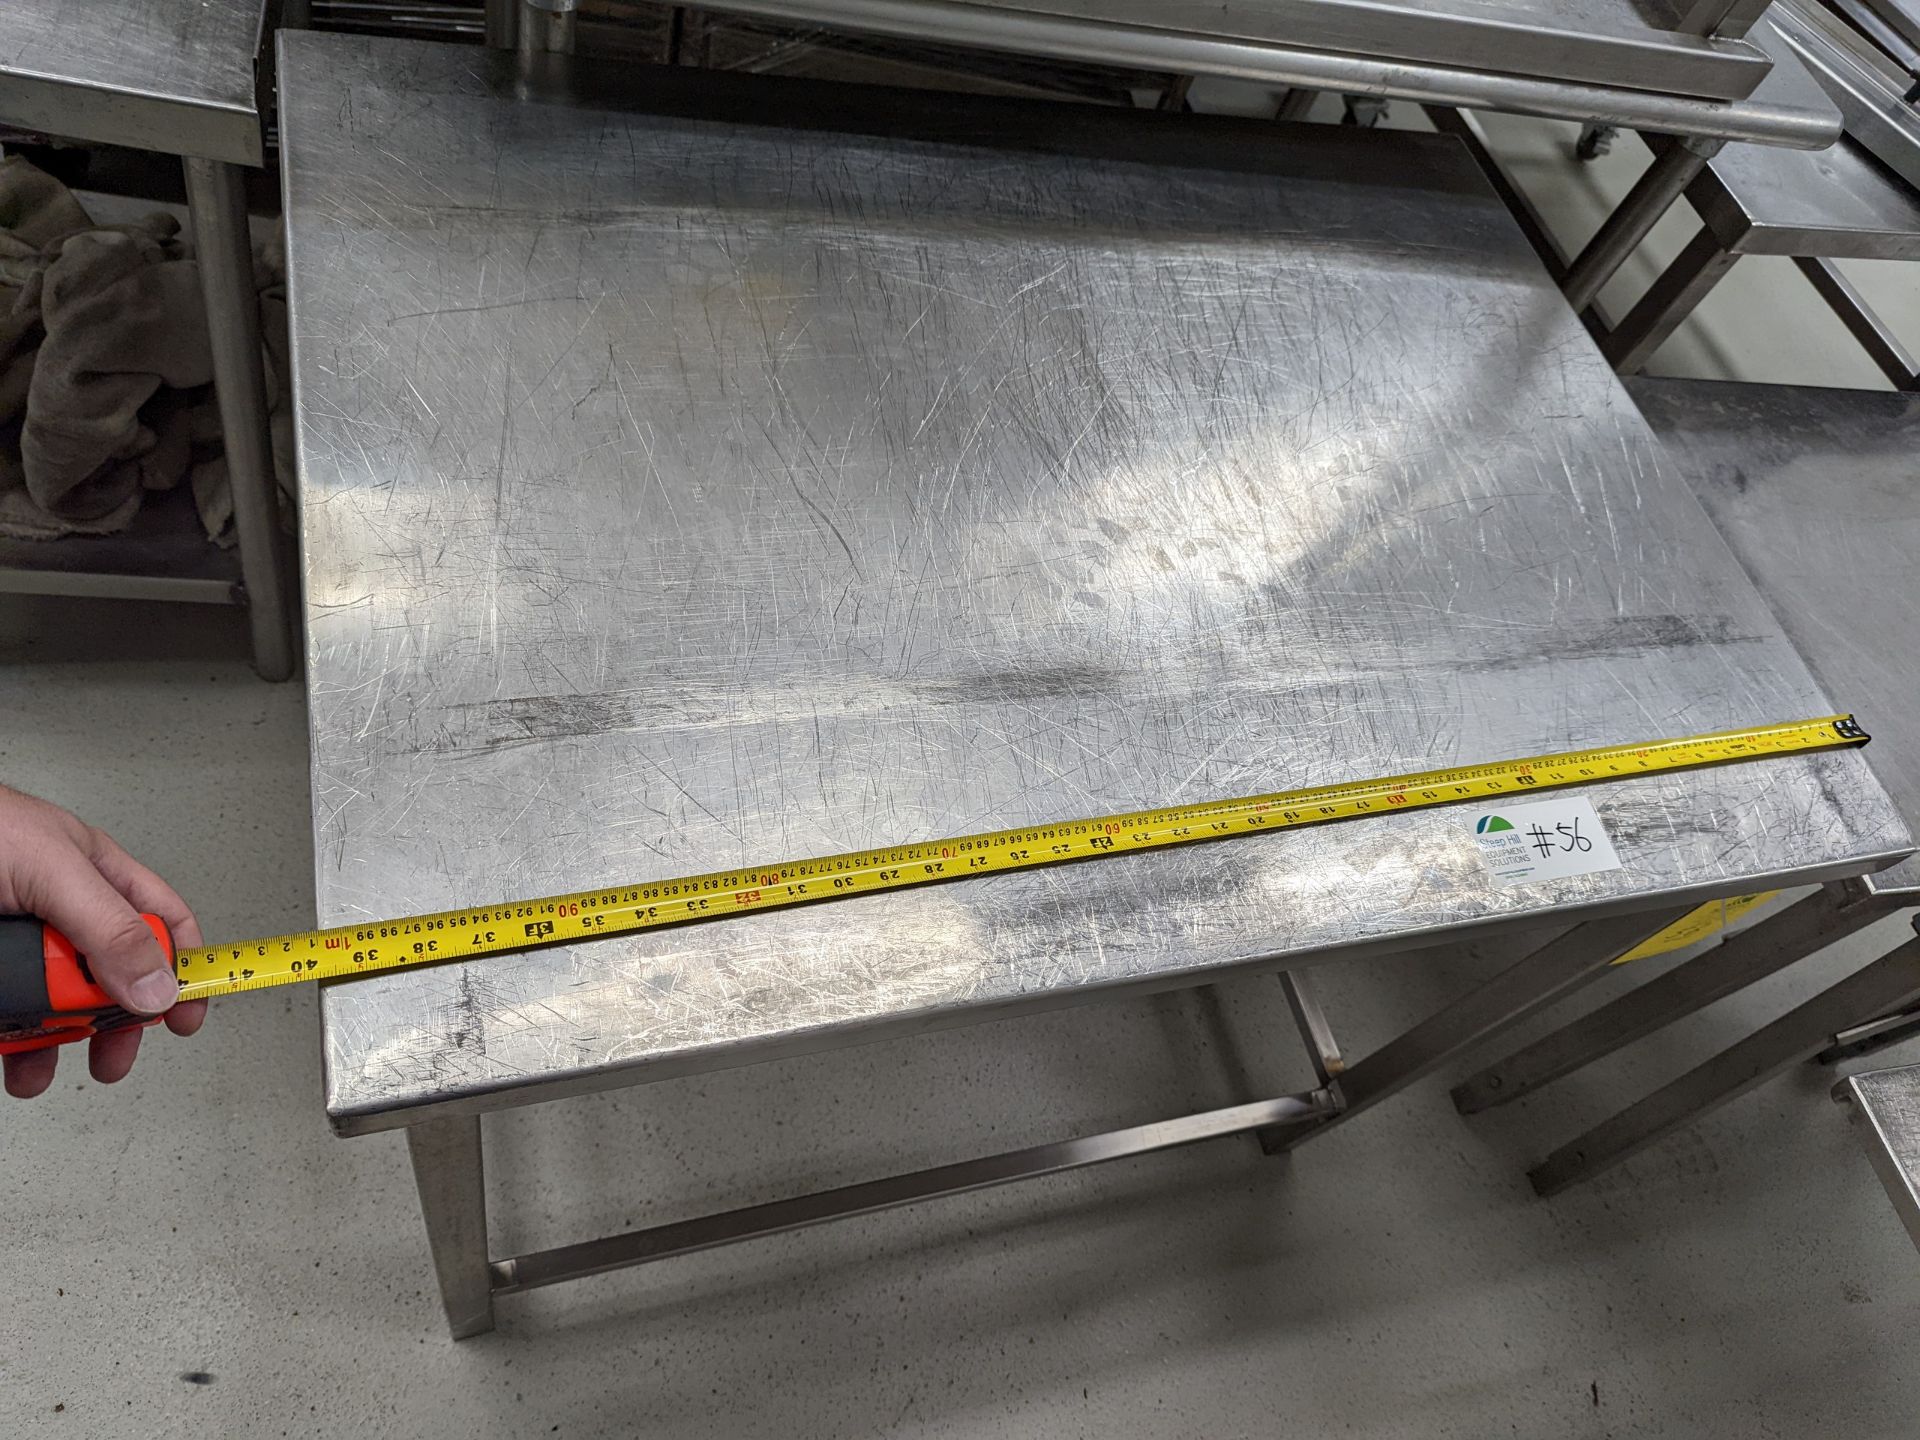 Stainless Table, 40Lx30Wx34H - Image 3 of 4